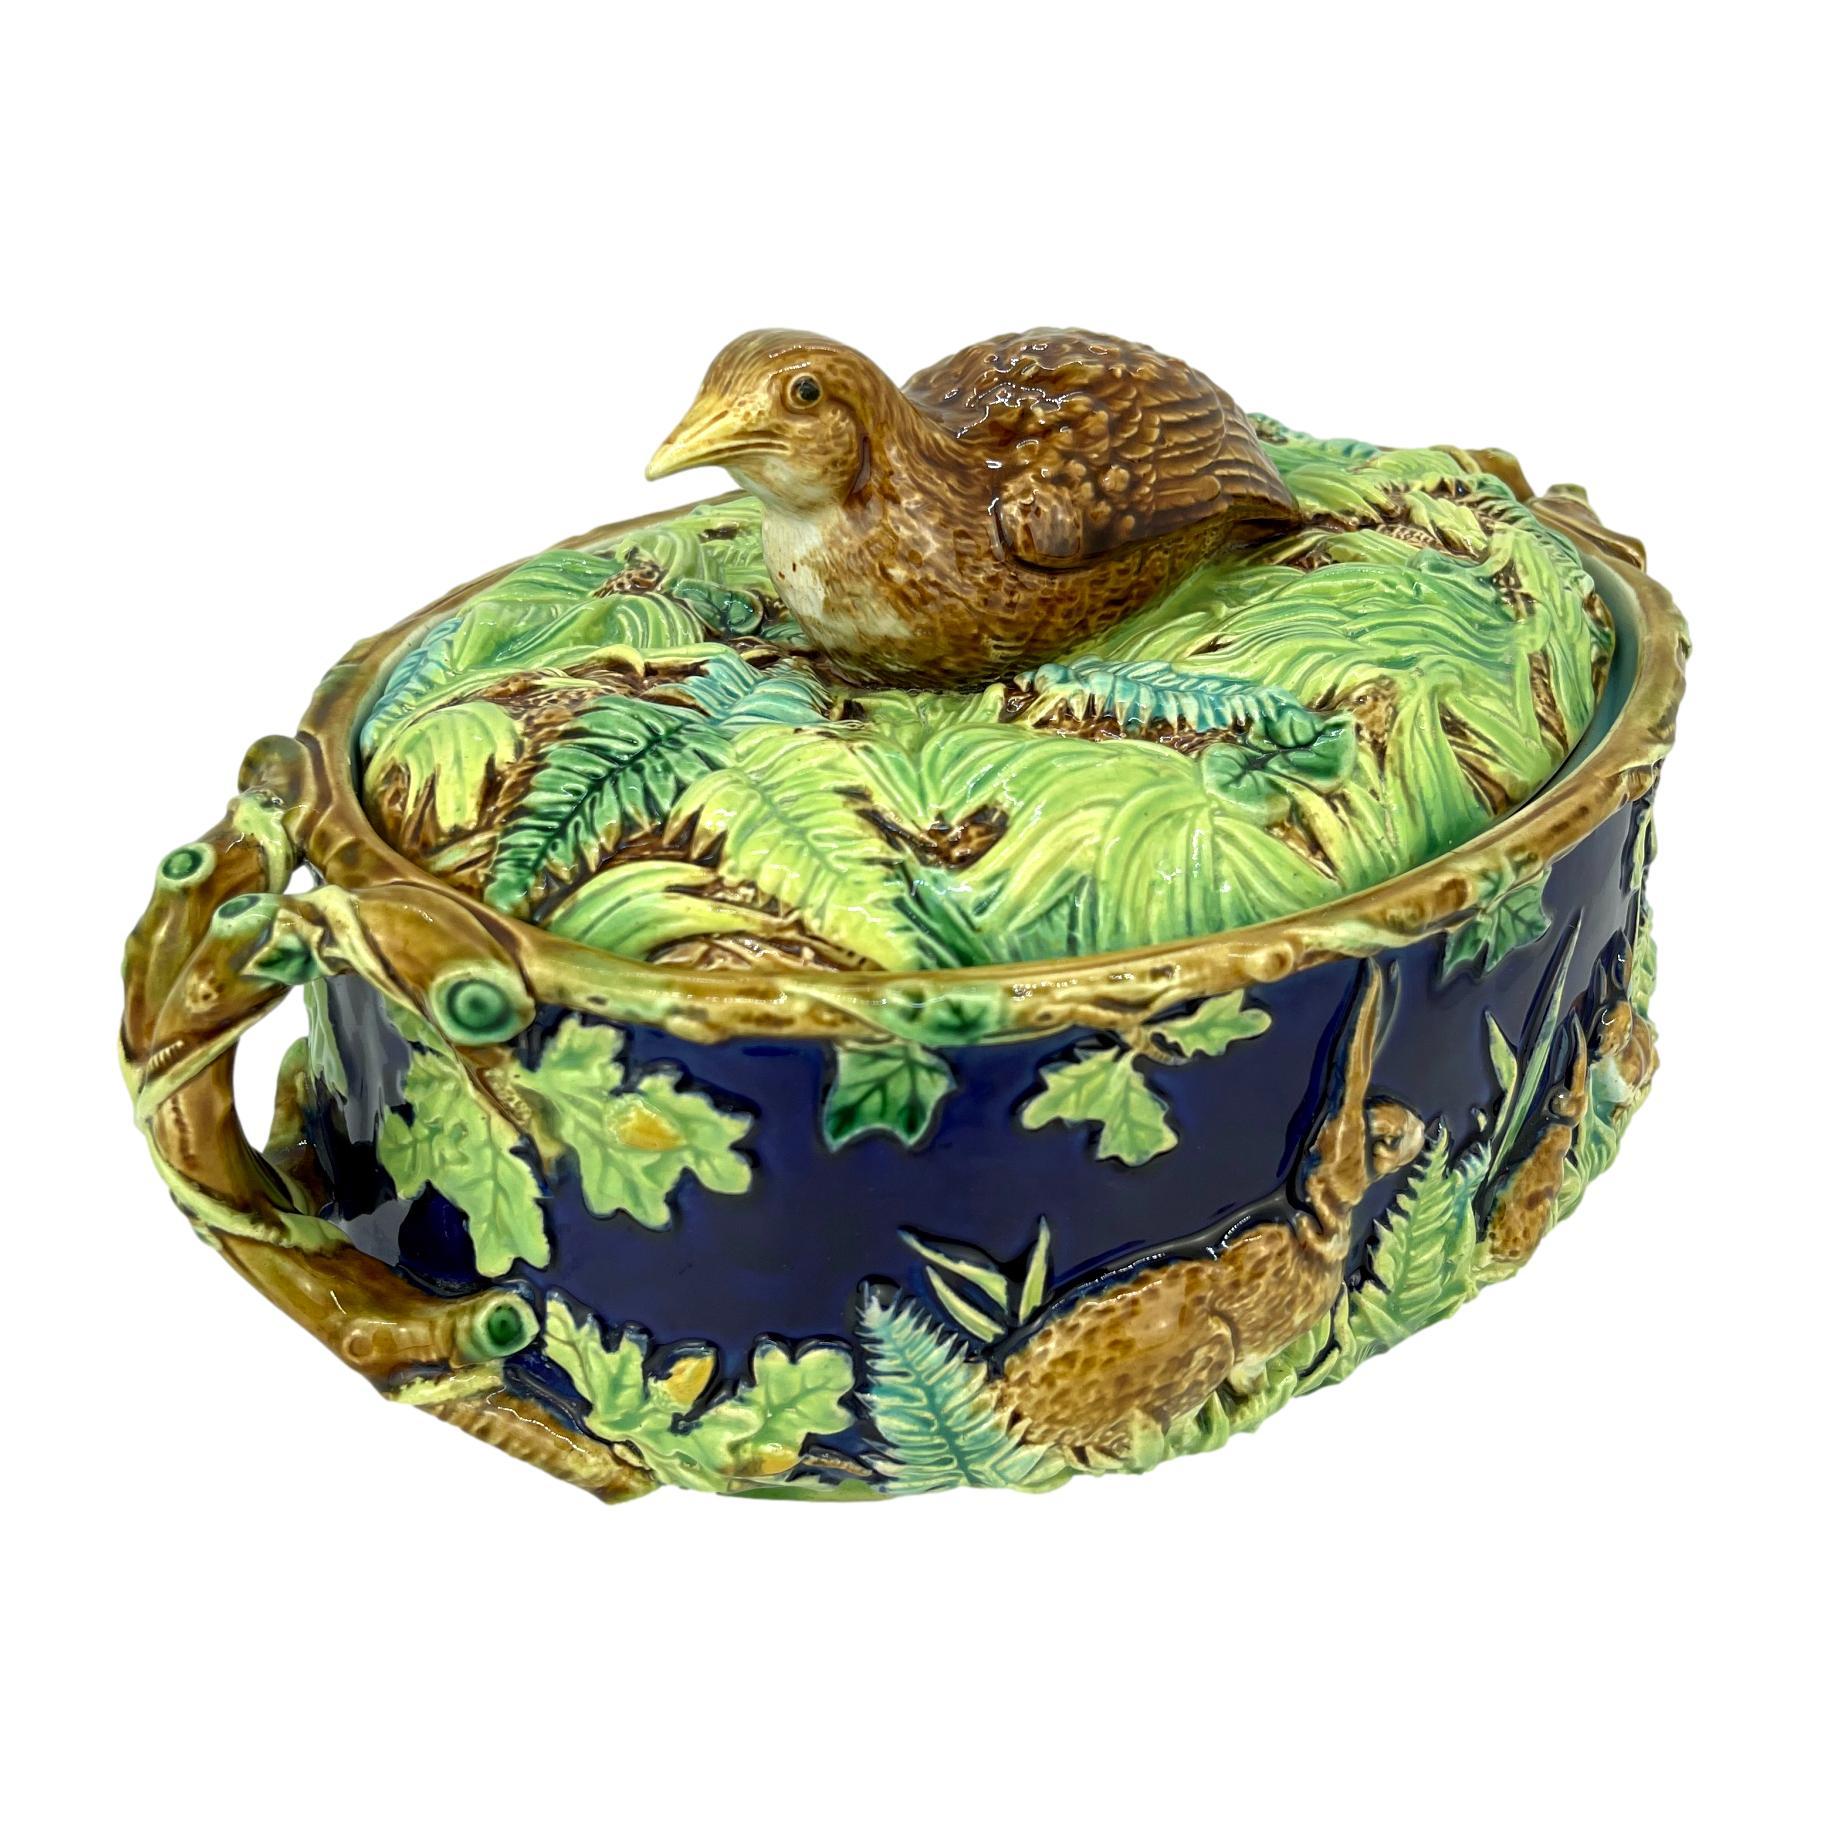 George Jones Majolica Partridge Tureen/Game Pie dish, molded with a single partridge nesting among grasses forming the knop, the dish with relief-molded rabbits among green-glazed ferns, grasses, and oak leaves with yellow acorns on a cobalt blue